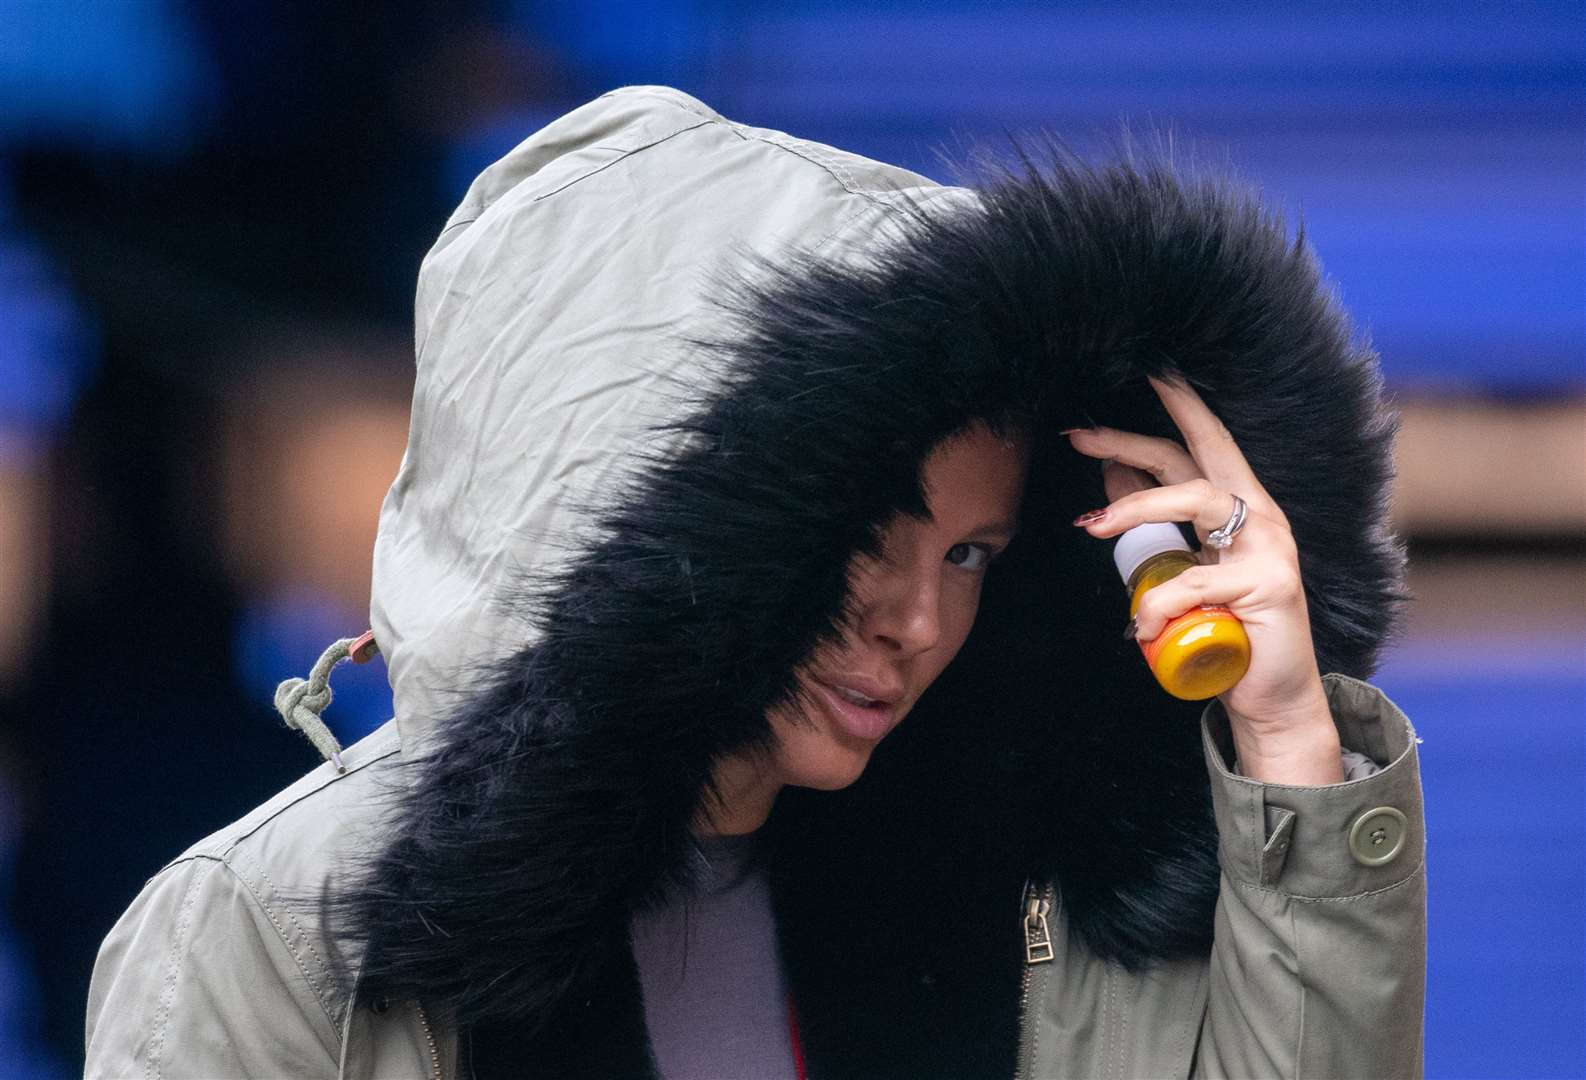 As the High Court case began, Rebekah Vardy arrived for a Dancing On Ice training session in Nottingham (Joe Giddens/PA)